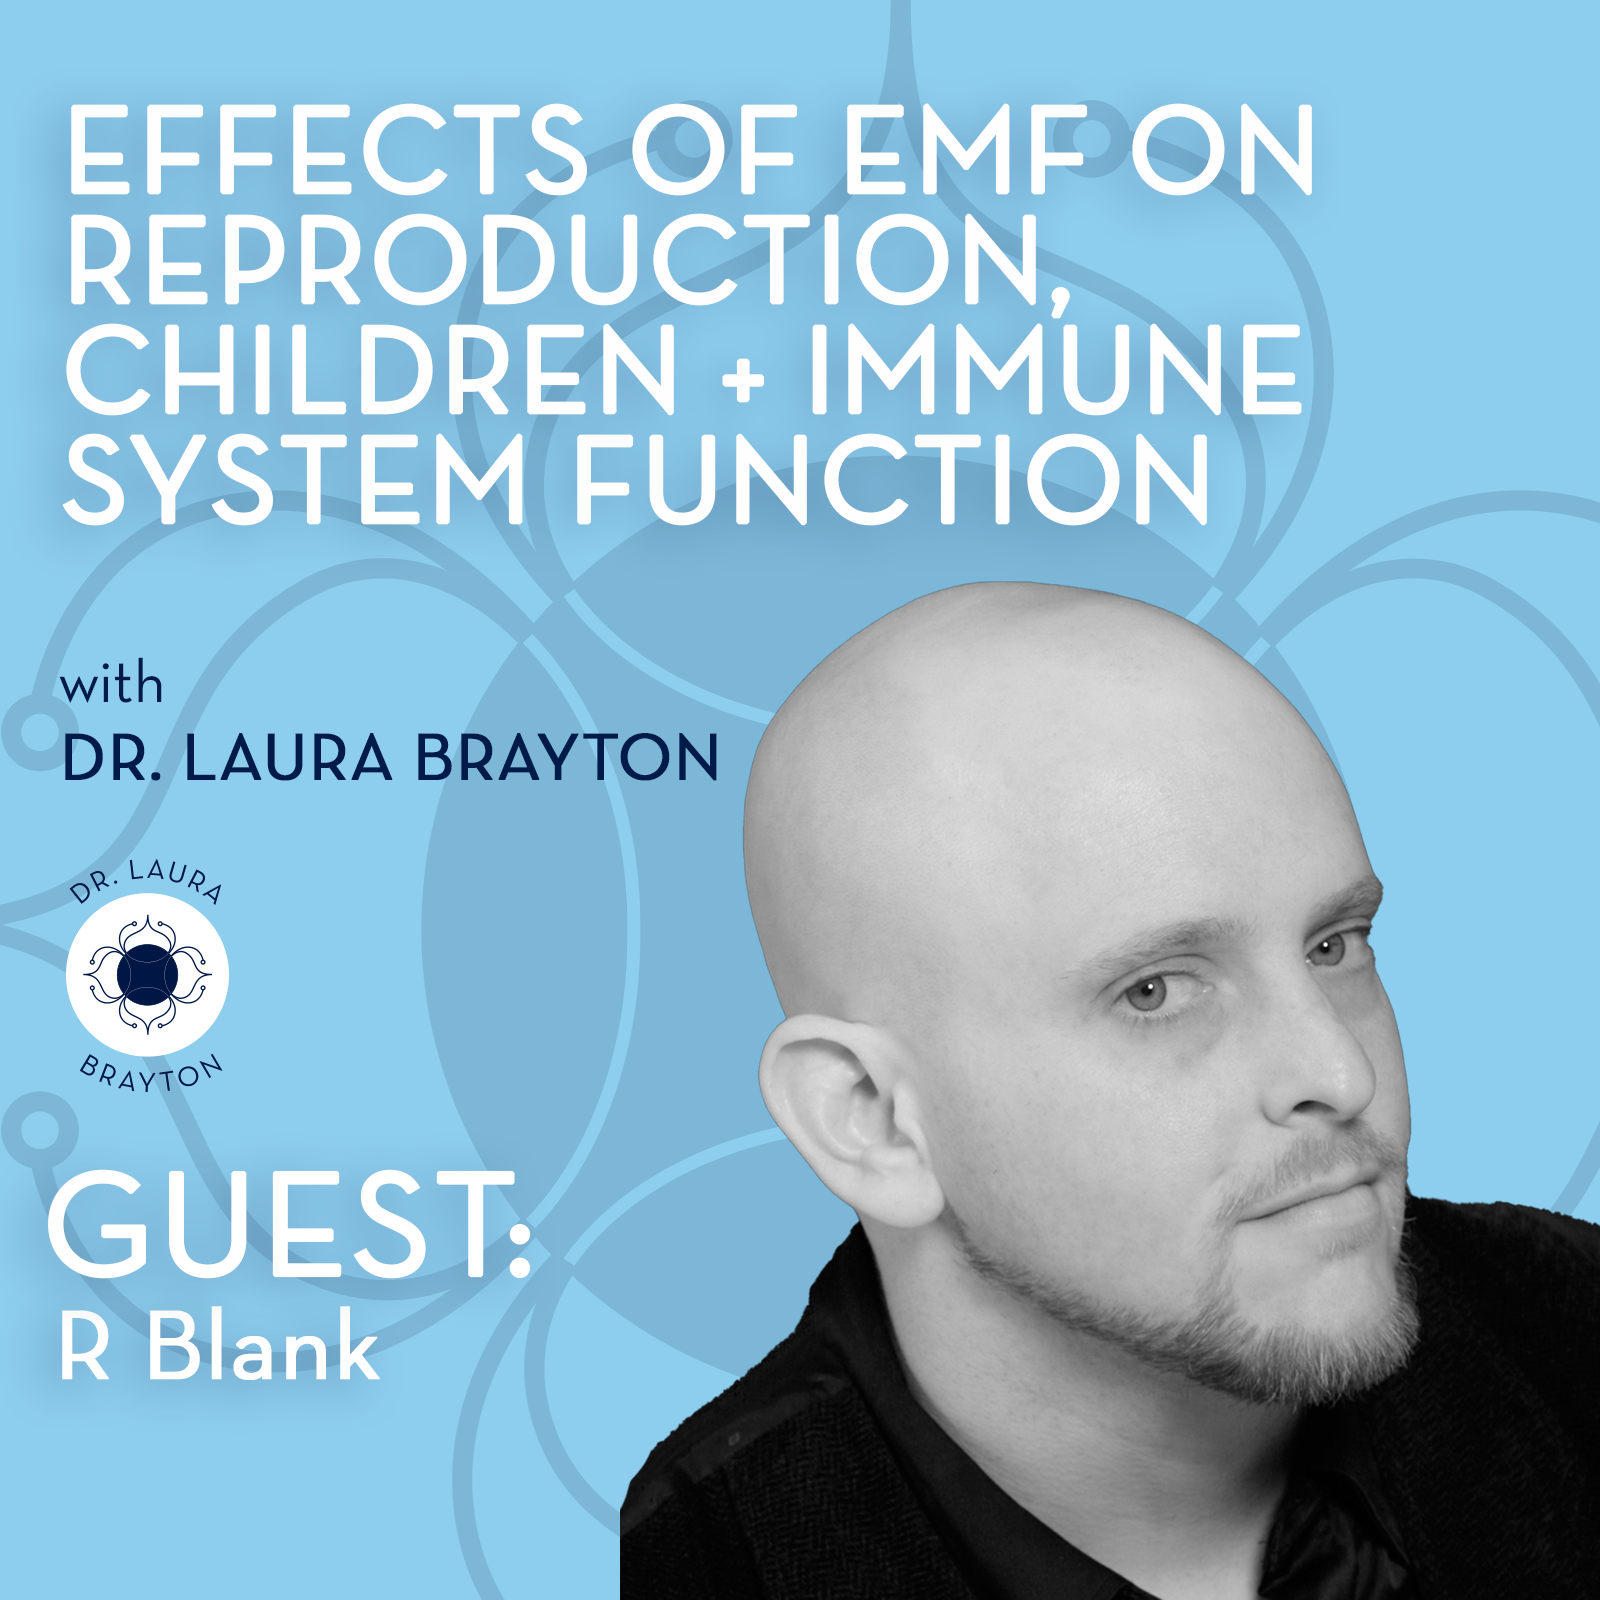 Effects of EMF on Reproduction, Children + Immune System Function